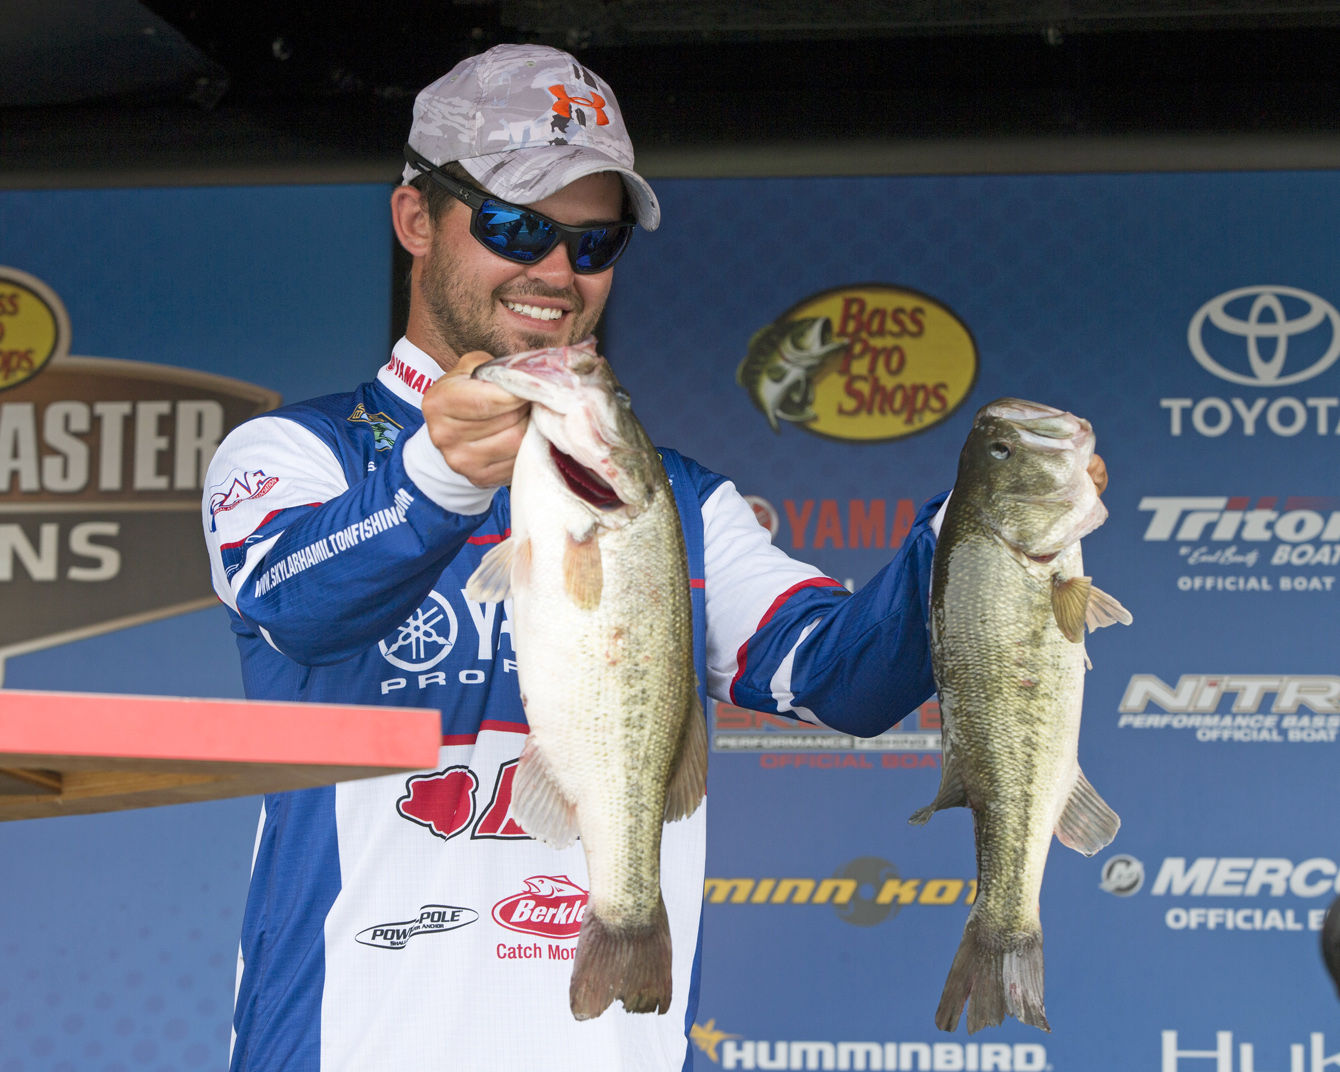 Vaulting to the top: Tennessee angler relies on boat to lead bass